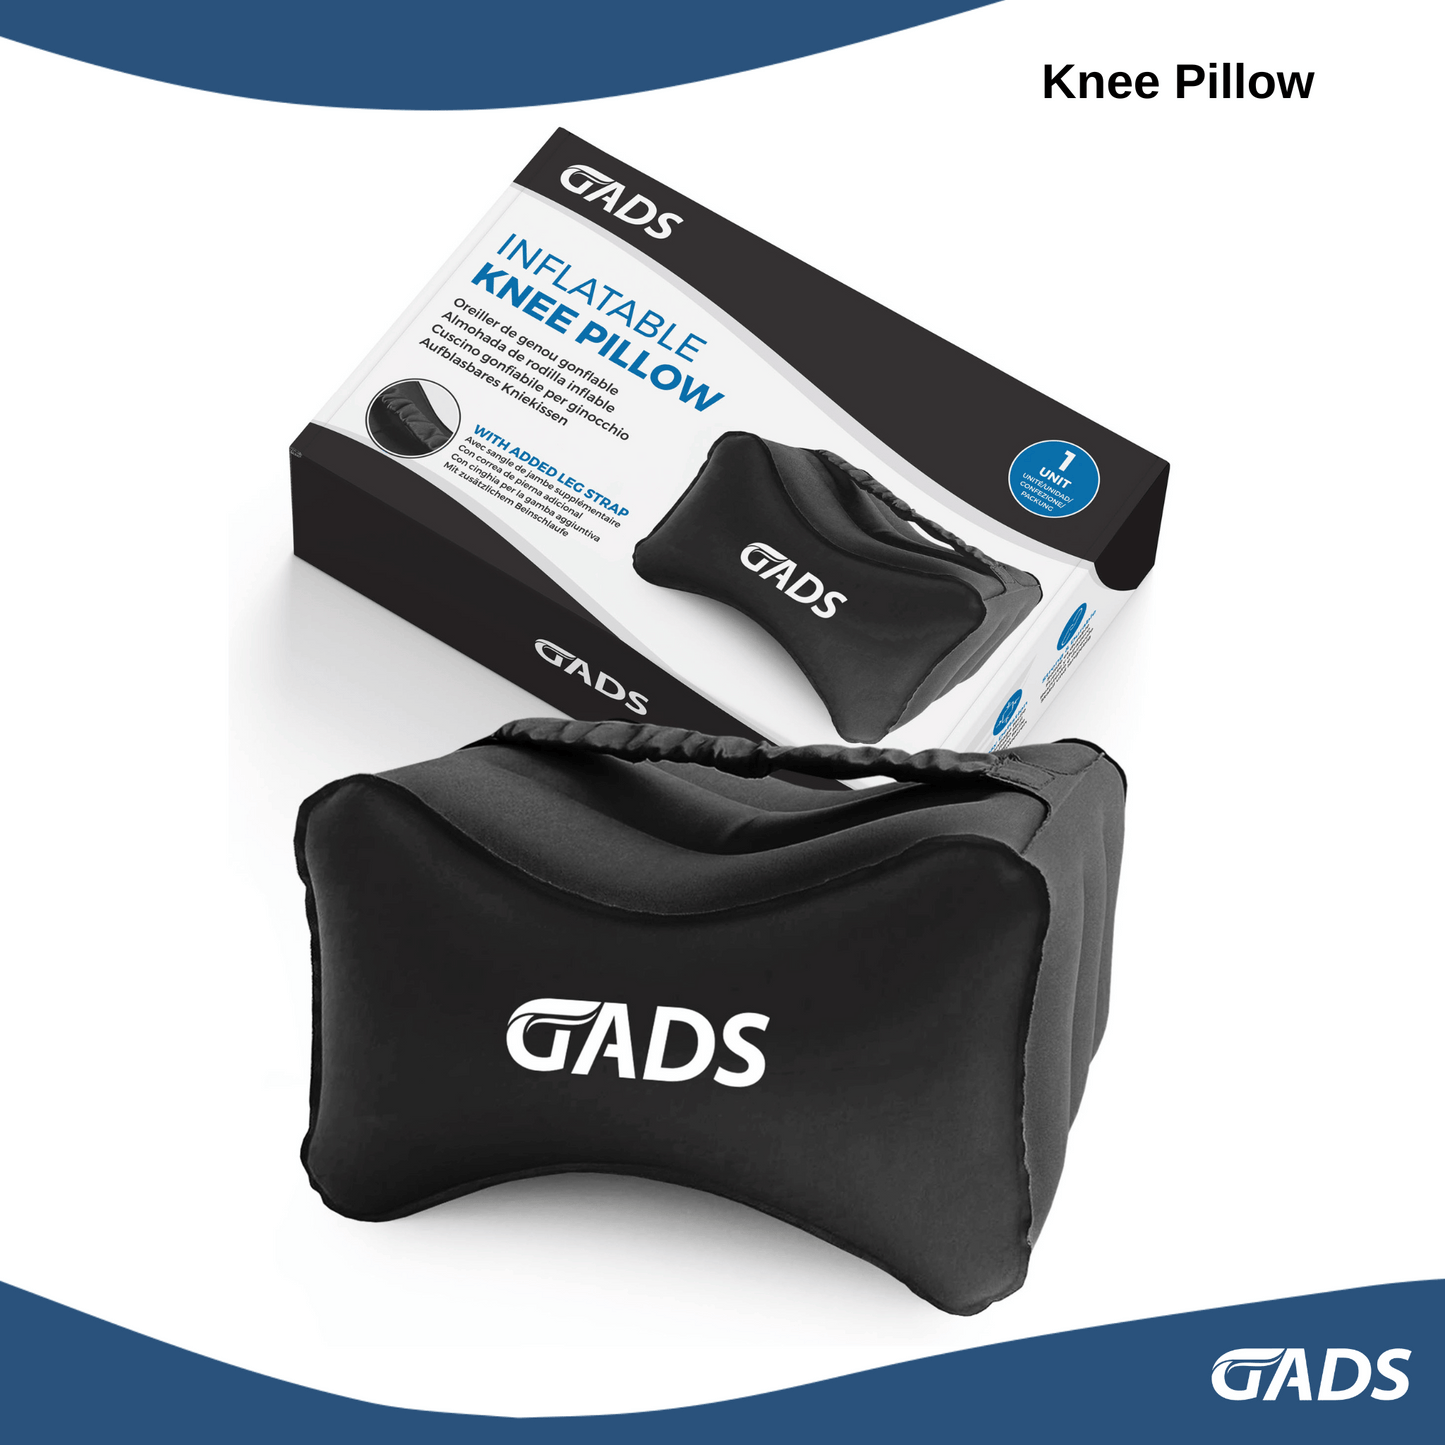 Premium Inflatable Knee Pillow – Ultimate Comfort for Side Sleepers, Ideal for Travel, Orthopedic Relief for Sciatica, Hip & Joint Pain – Lightweight, Adjustable Firmness Leg Support Pillow